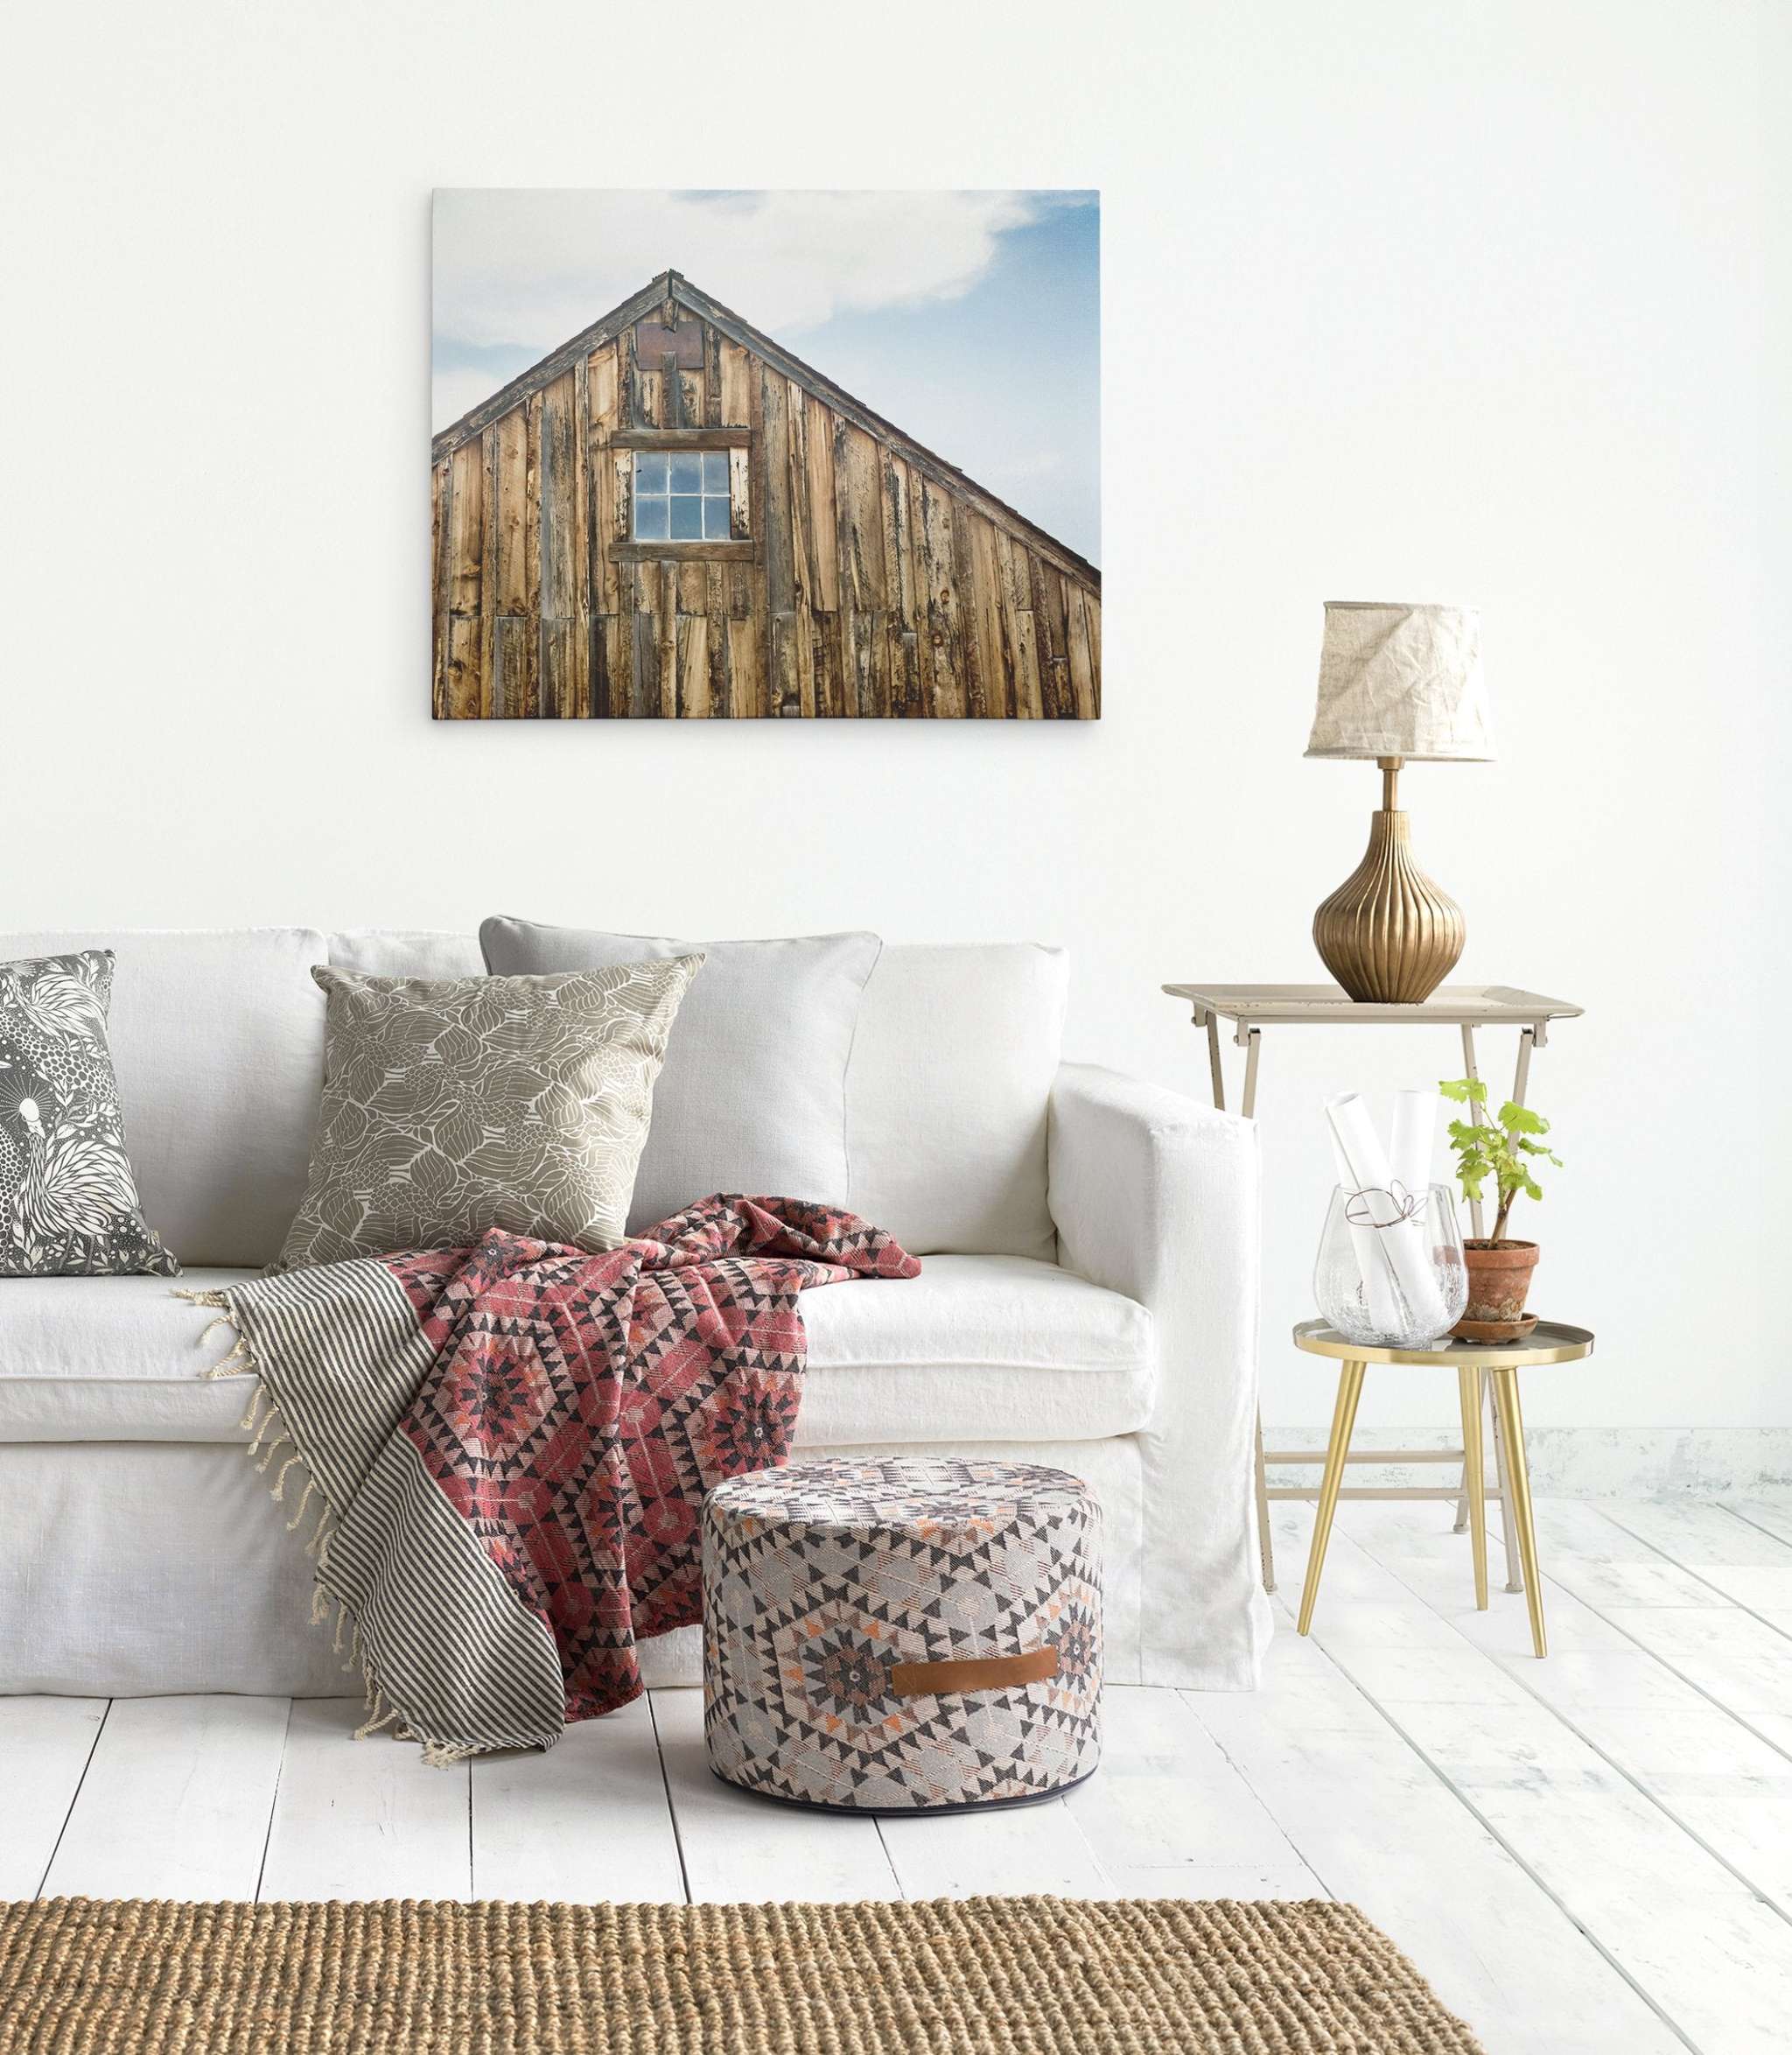 A cozy living room with a white sofa adorned with various patterned pillows and a red patterned throw blanket. In front of the sofa is a patterned ottoman. To the right, a small wooden side table holds a lamp and potted plant. Farmhouse Wall Art, Rustic Barn Decor, 'Old Barn at Bodie' by Offley Green hangs above the sofa.